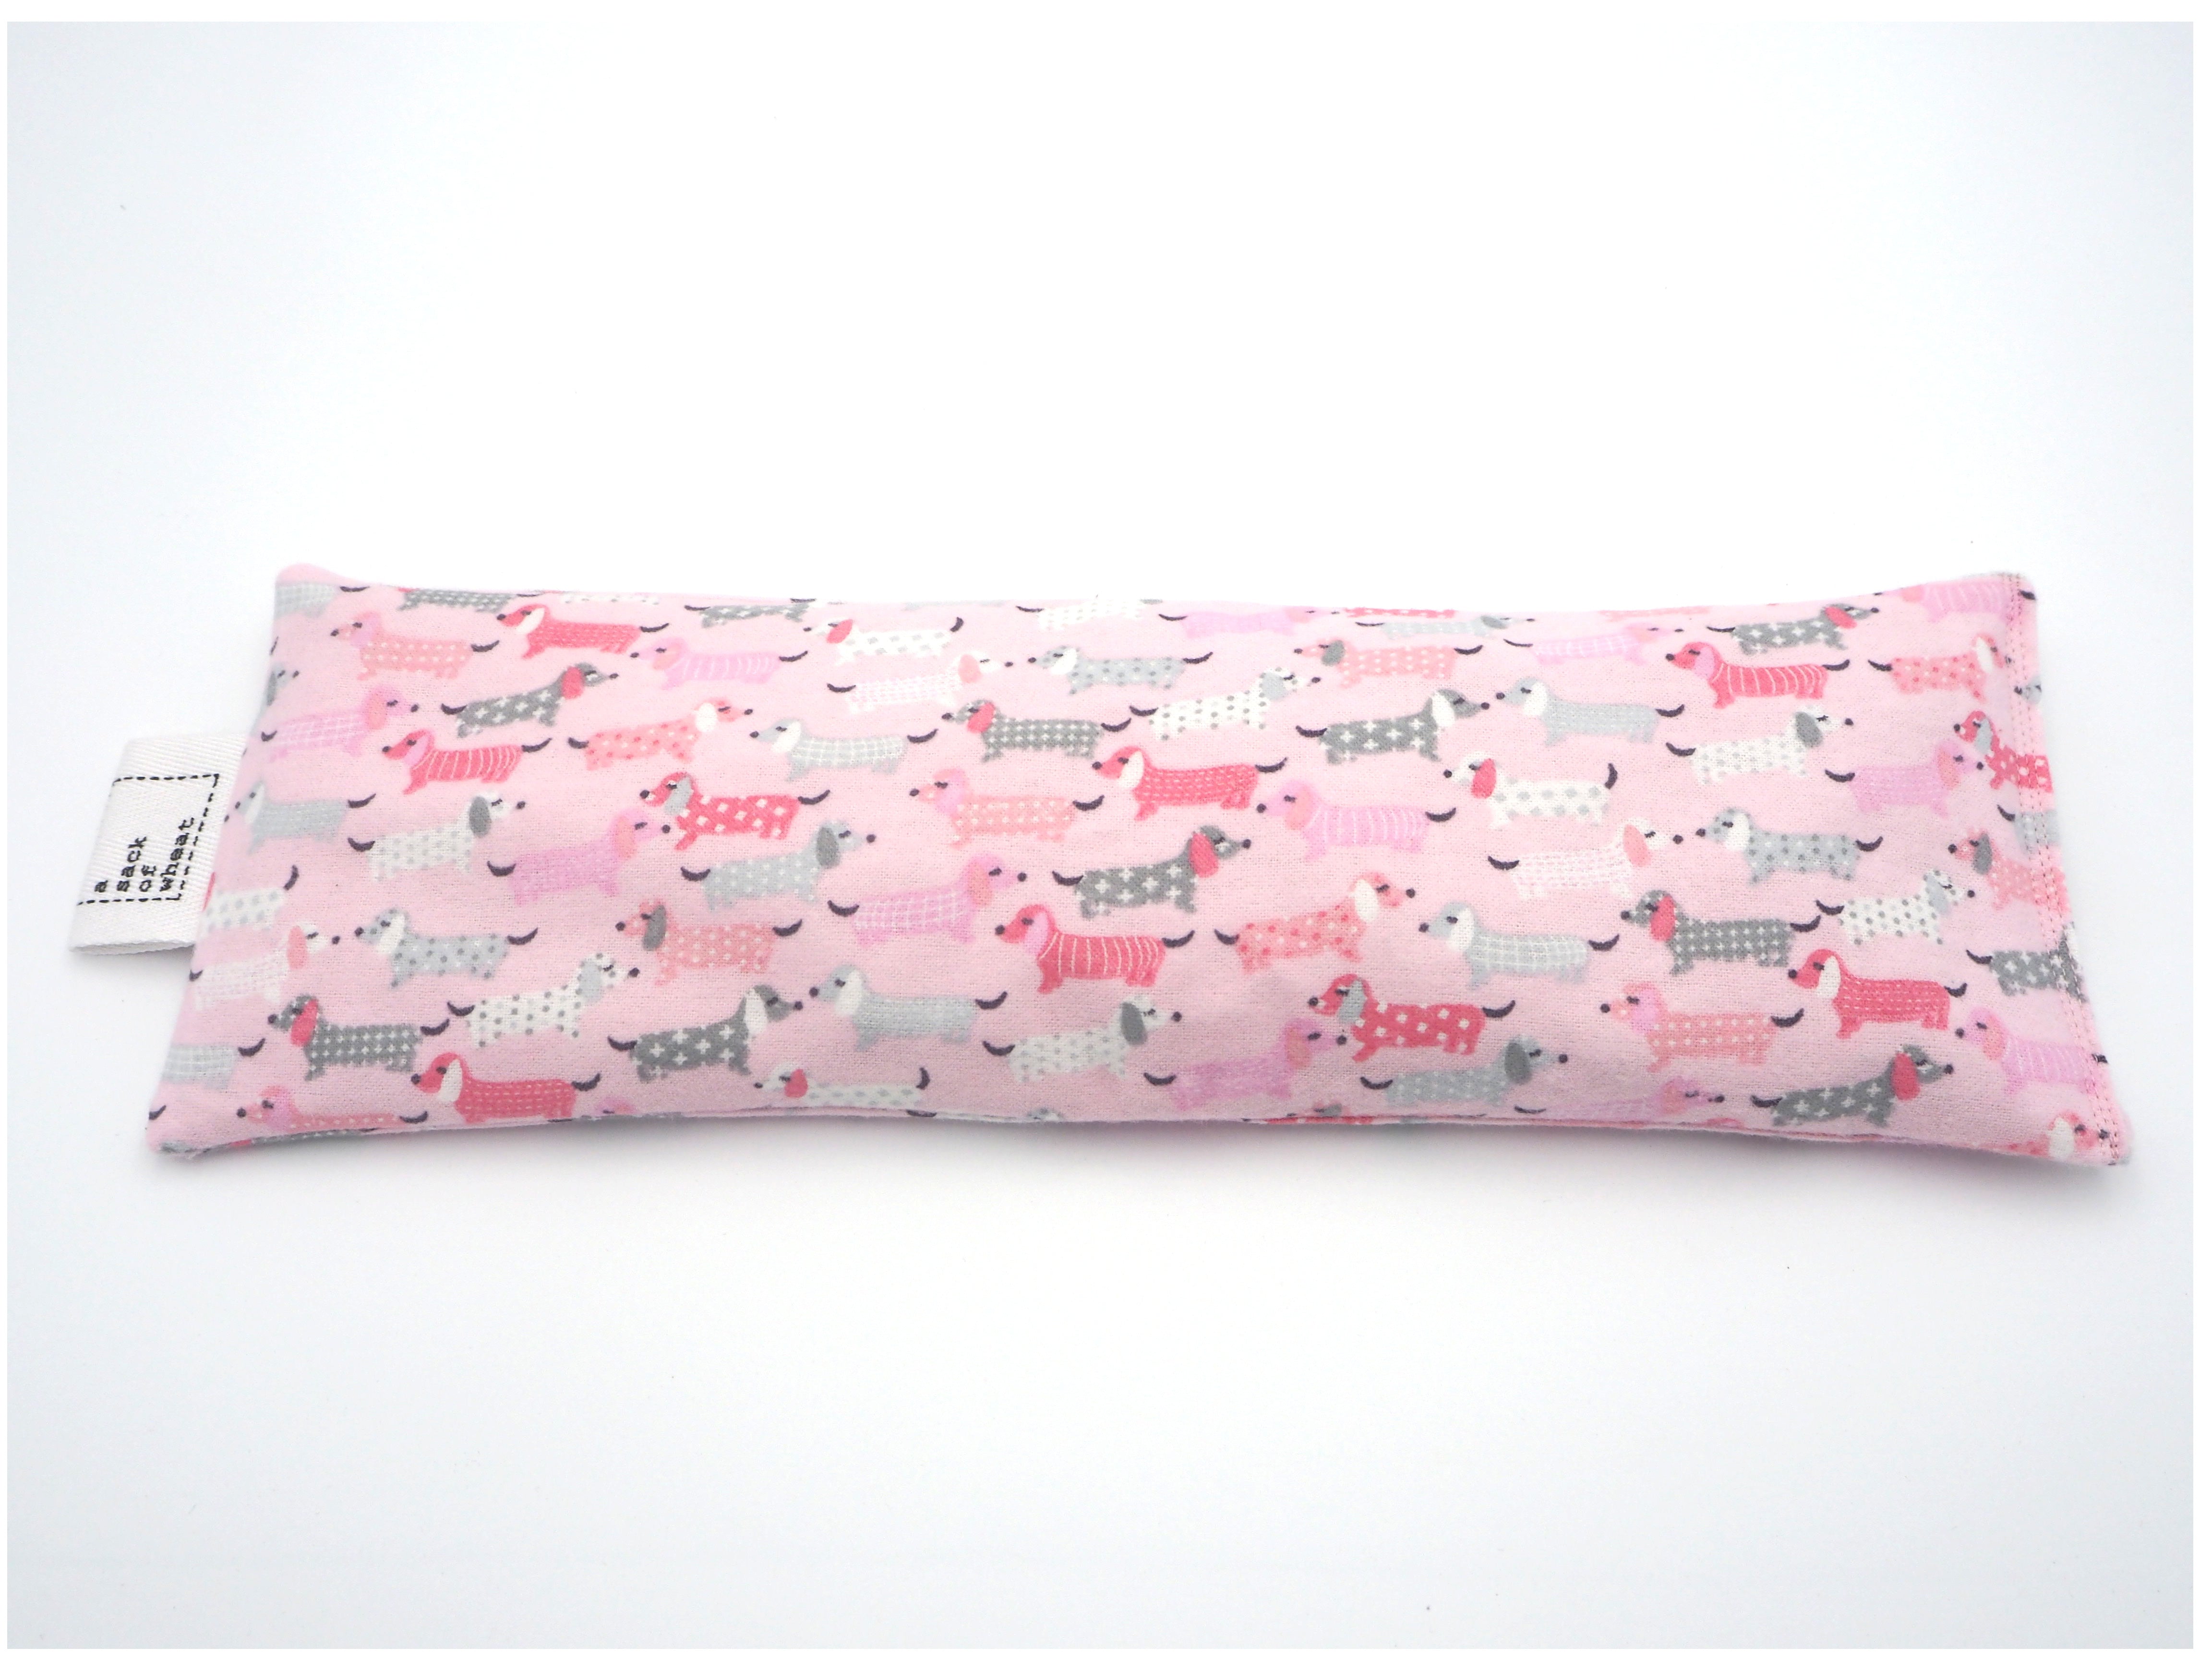 Flat view of A Sack Of Wheat, featuring pink, fluffy Dash Hounds on soft flannelette, 100% cotton fabric